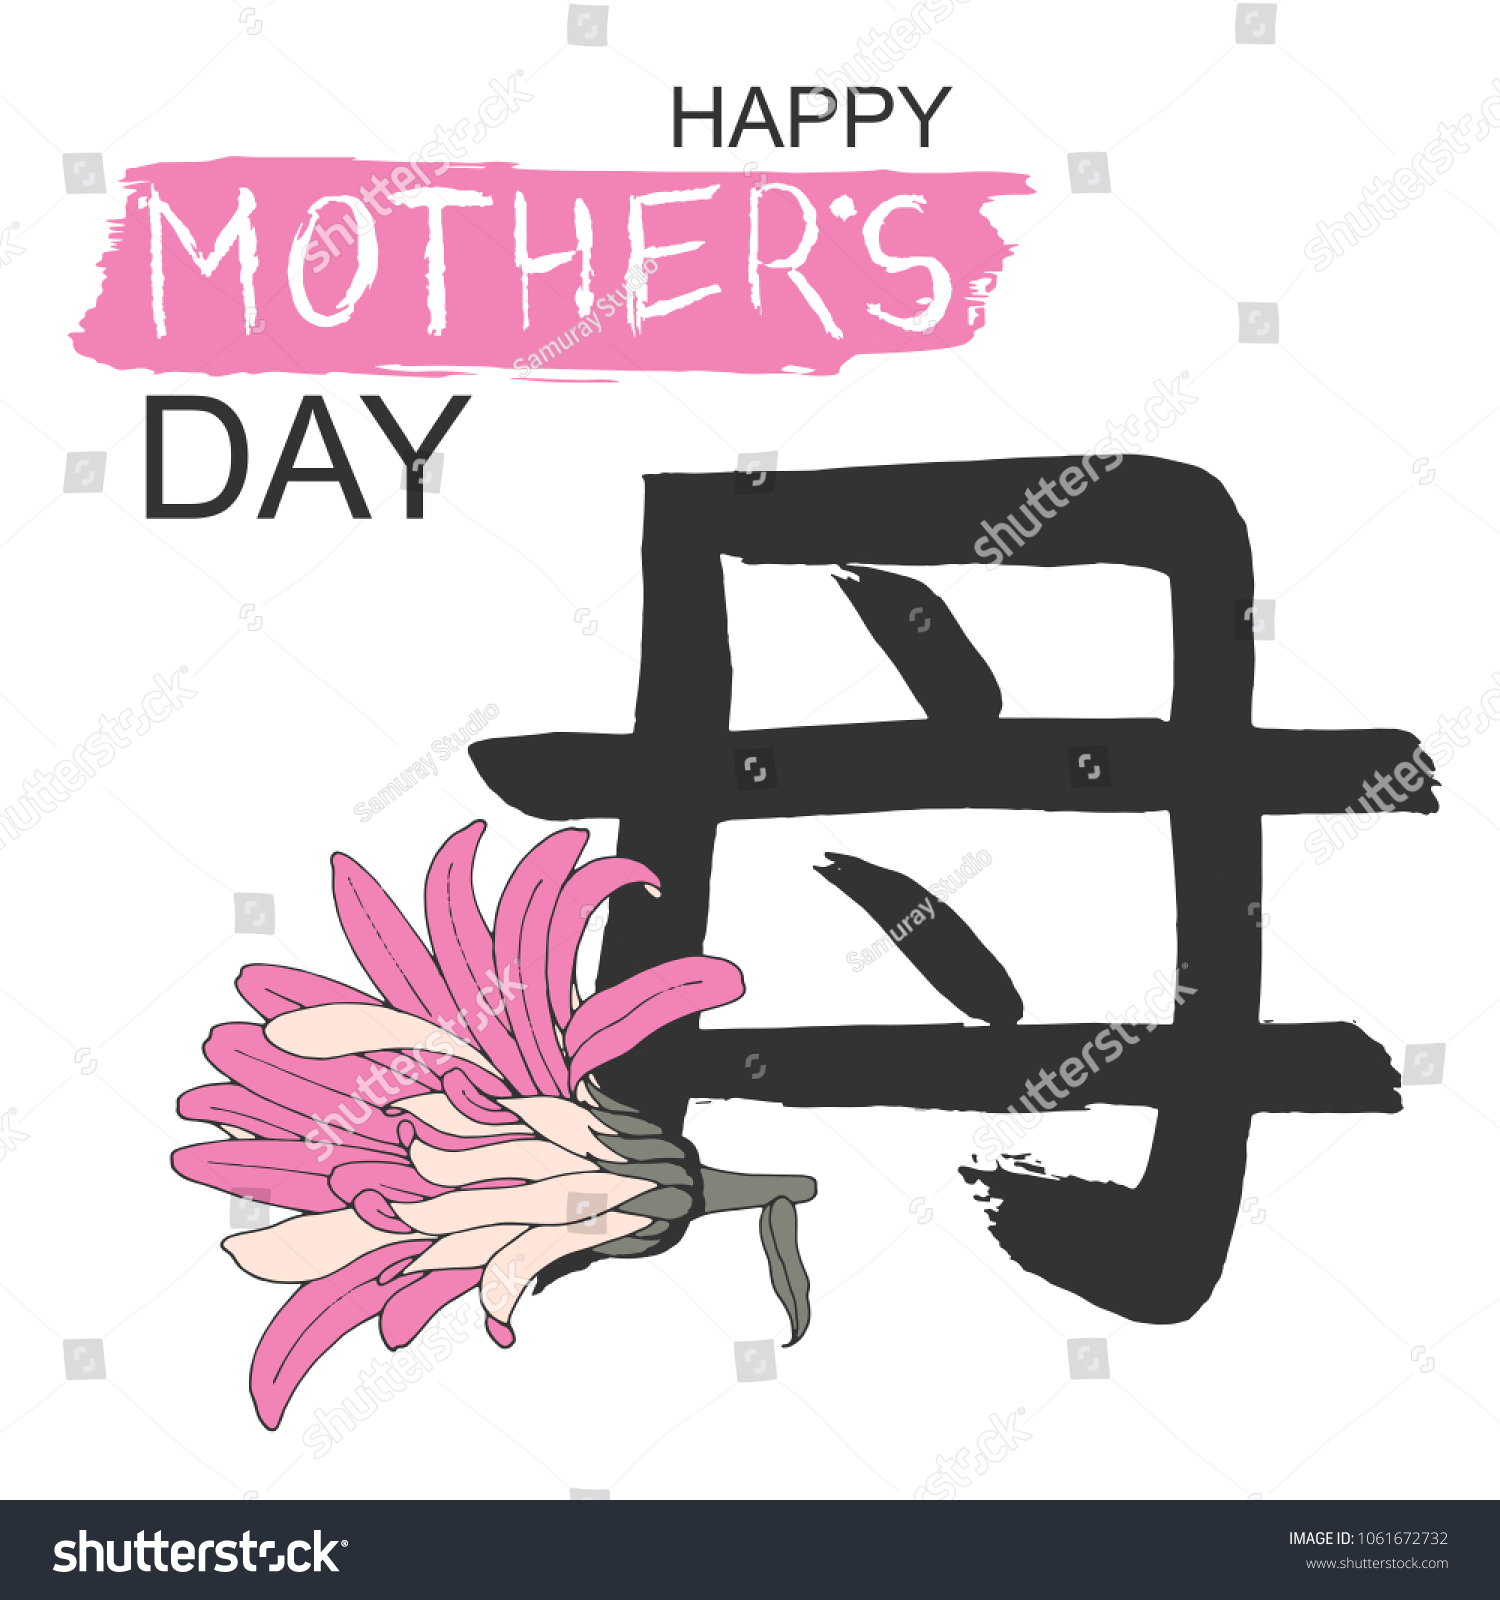 Happy Mothers Day Greeting Card Japanese Stock Vector Royalty Free 1061672732